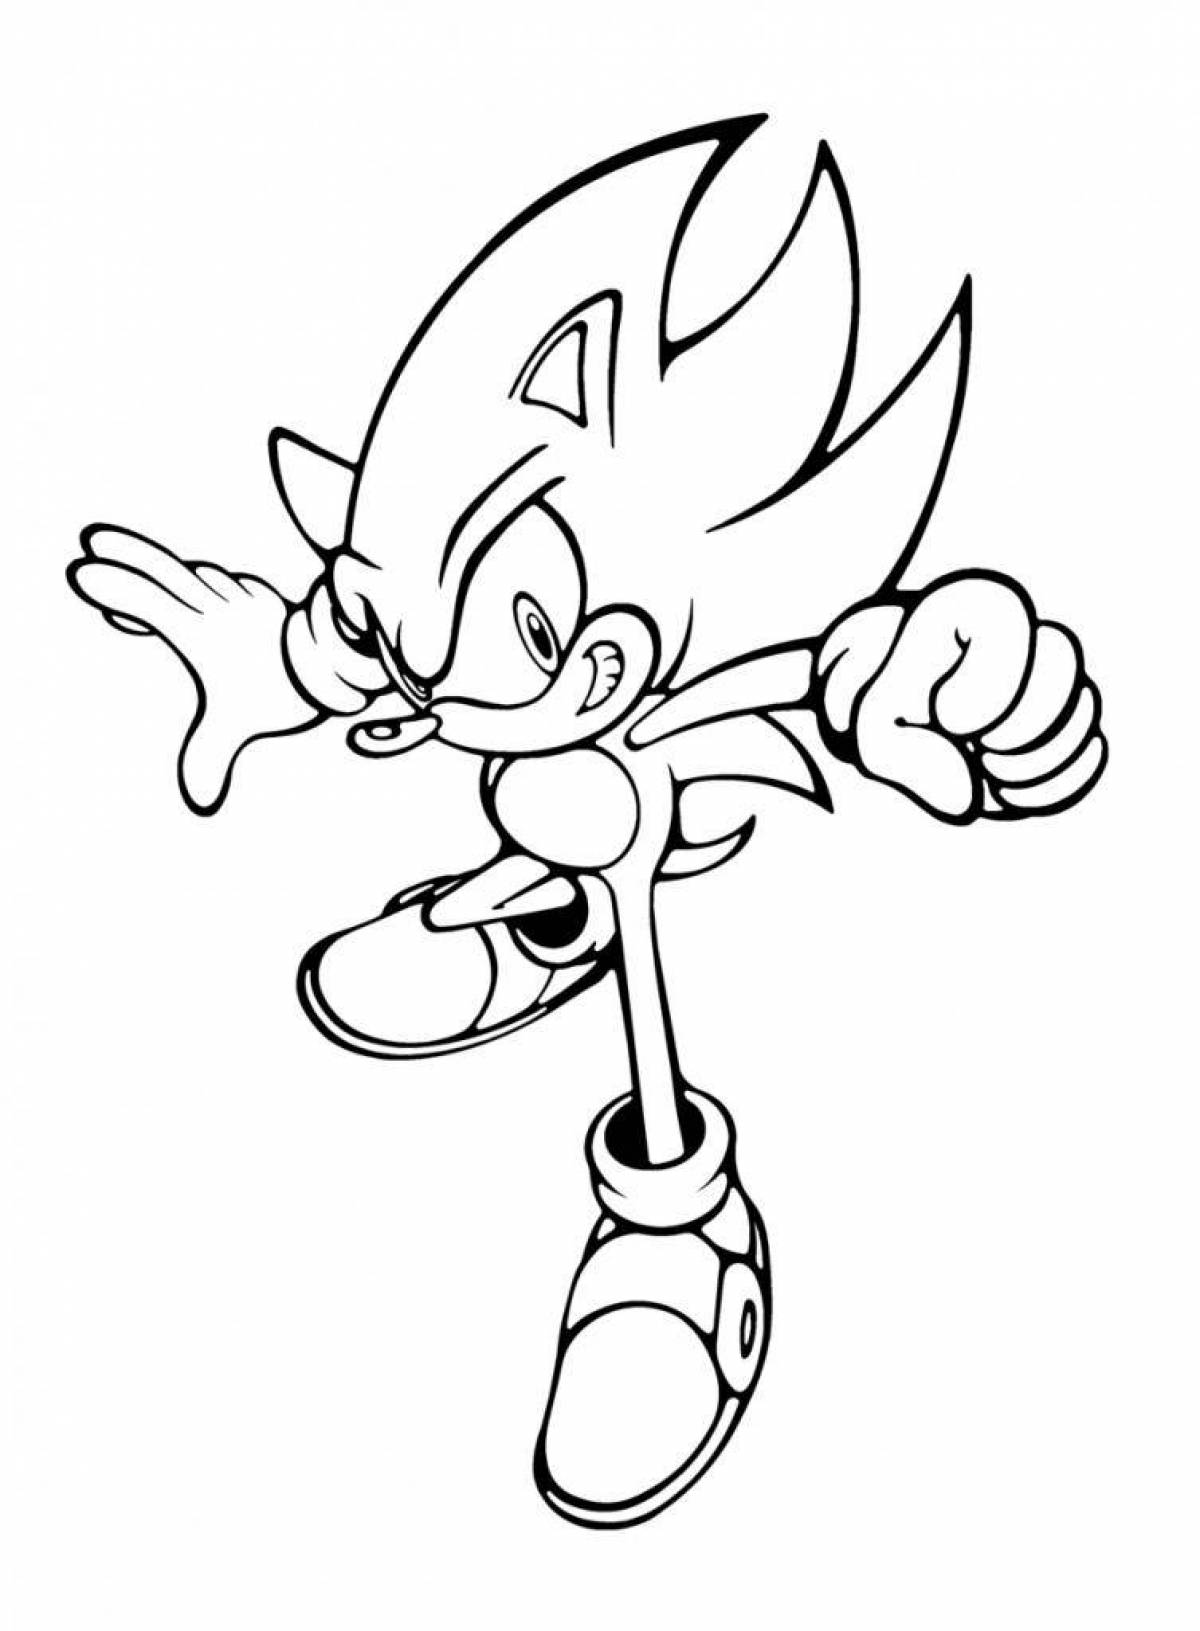 Royal golden sonic coloring page